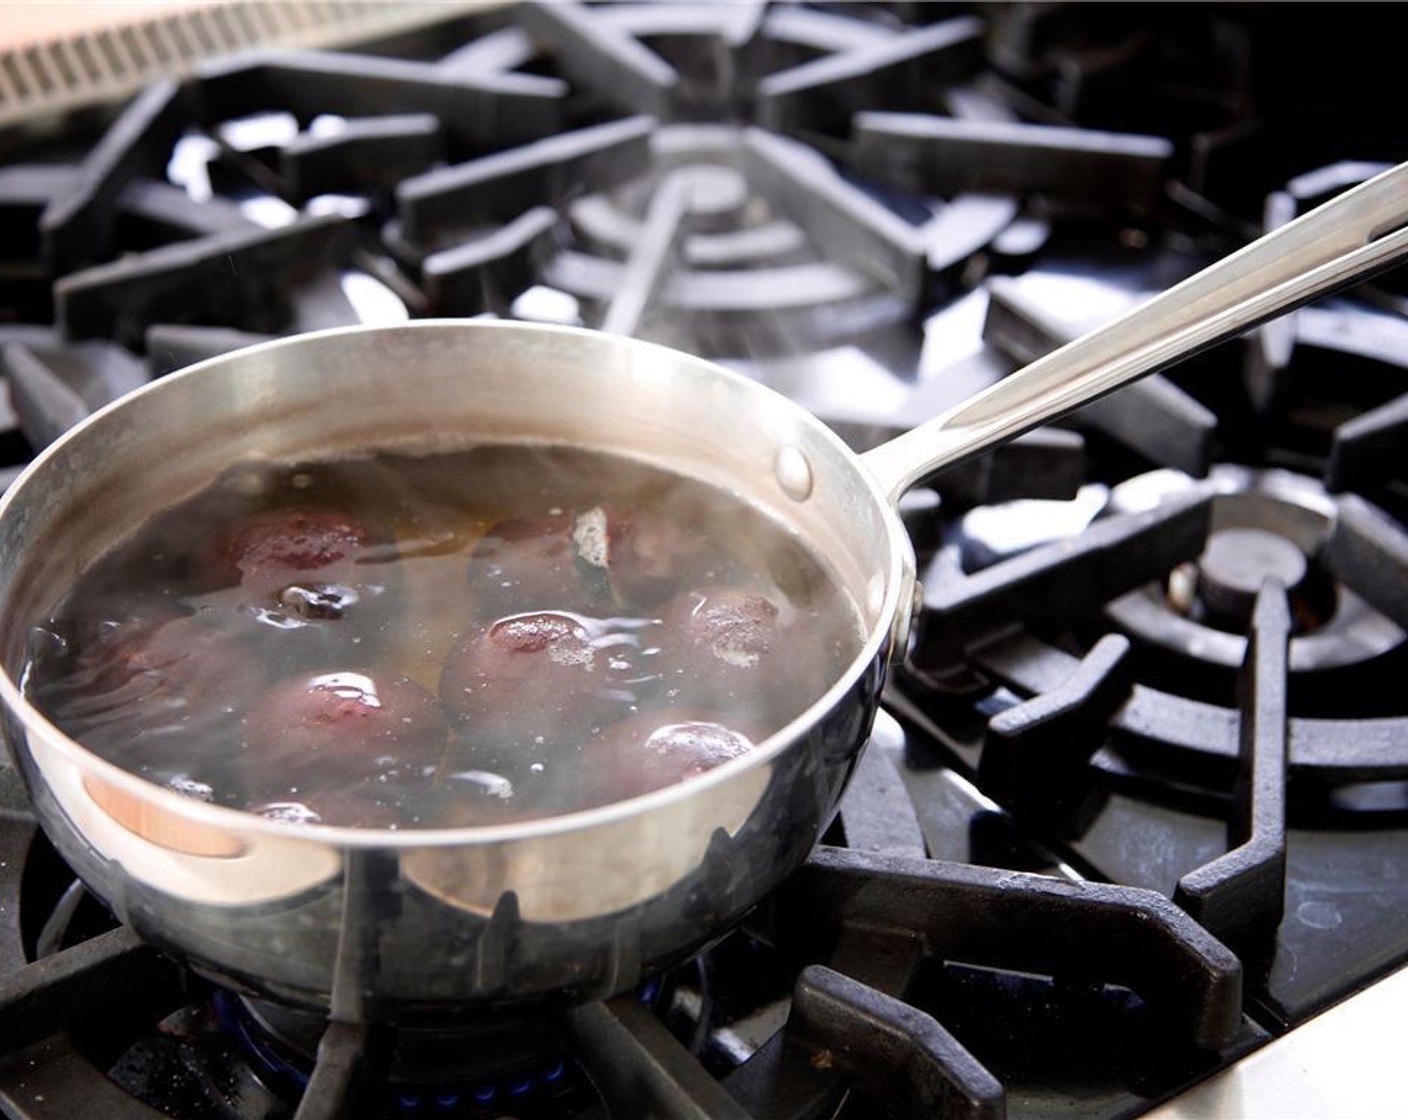 step 1 Place Purple Potatoes (2 1/4 cups) in a small saucepan and cover with cold water. Boil over high heat for 15-20 minutes or until fork tender. Drain. Place back into the saucepan and cover with lid to keep warm.